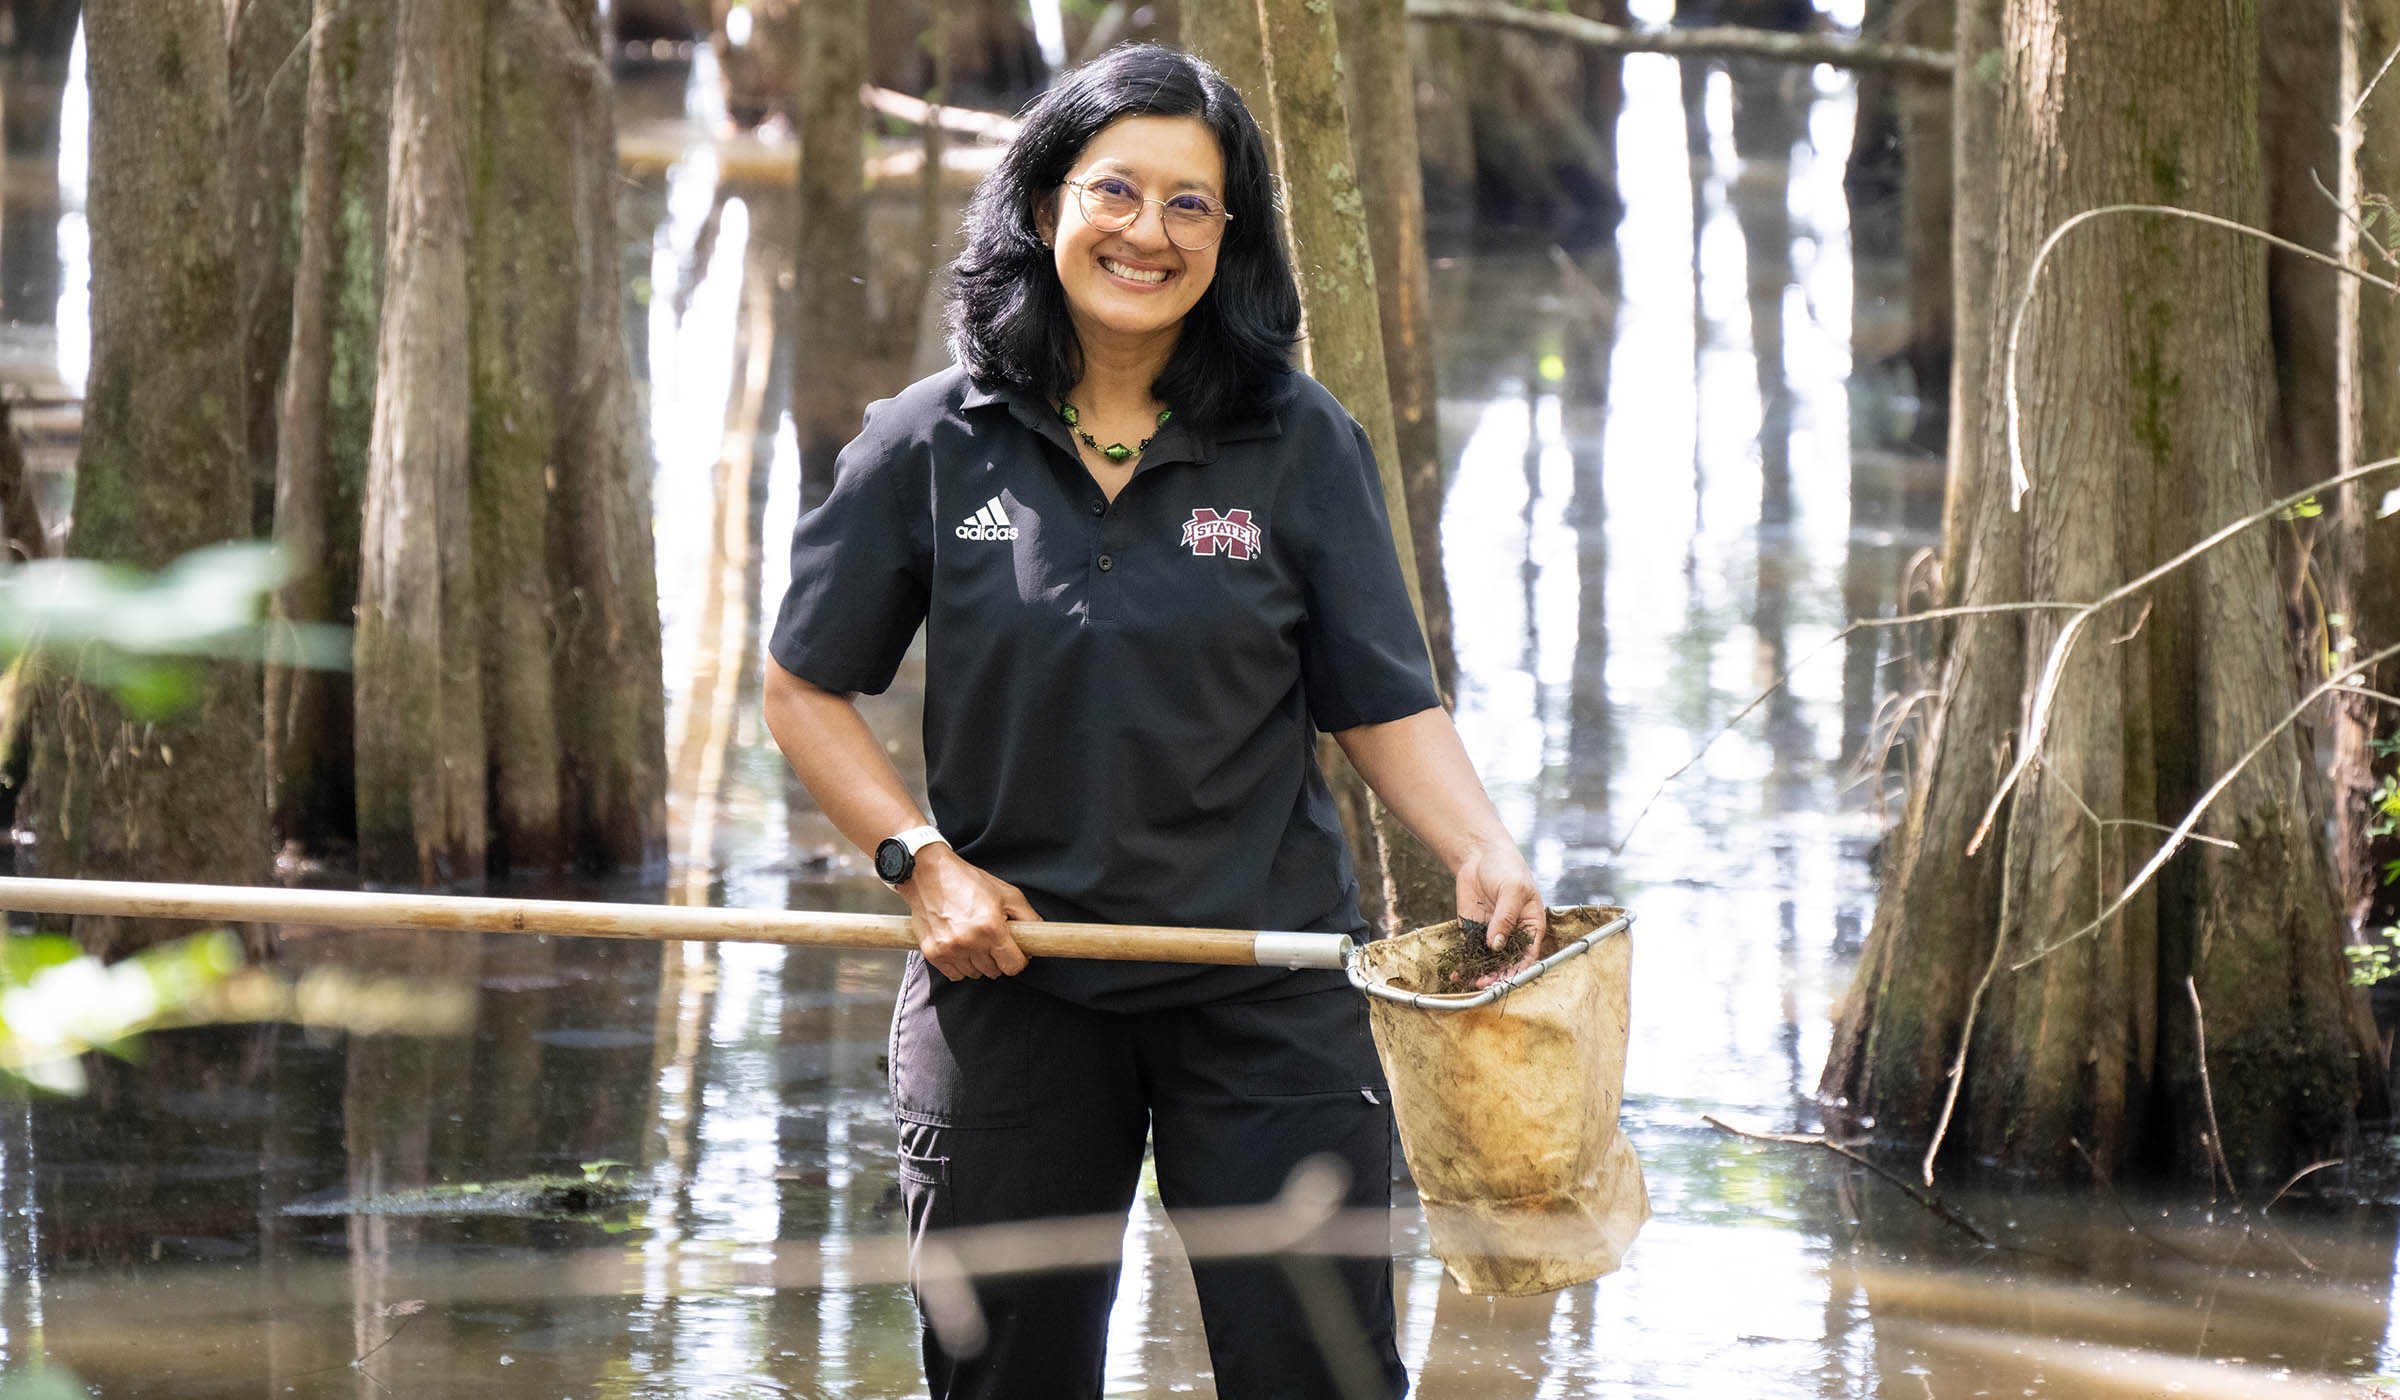 Sandra Correa, pictured wading in shallow waters at the Noxubee National Wildlife Refuge.